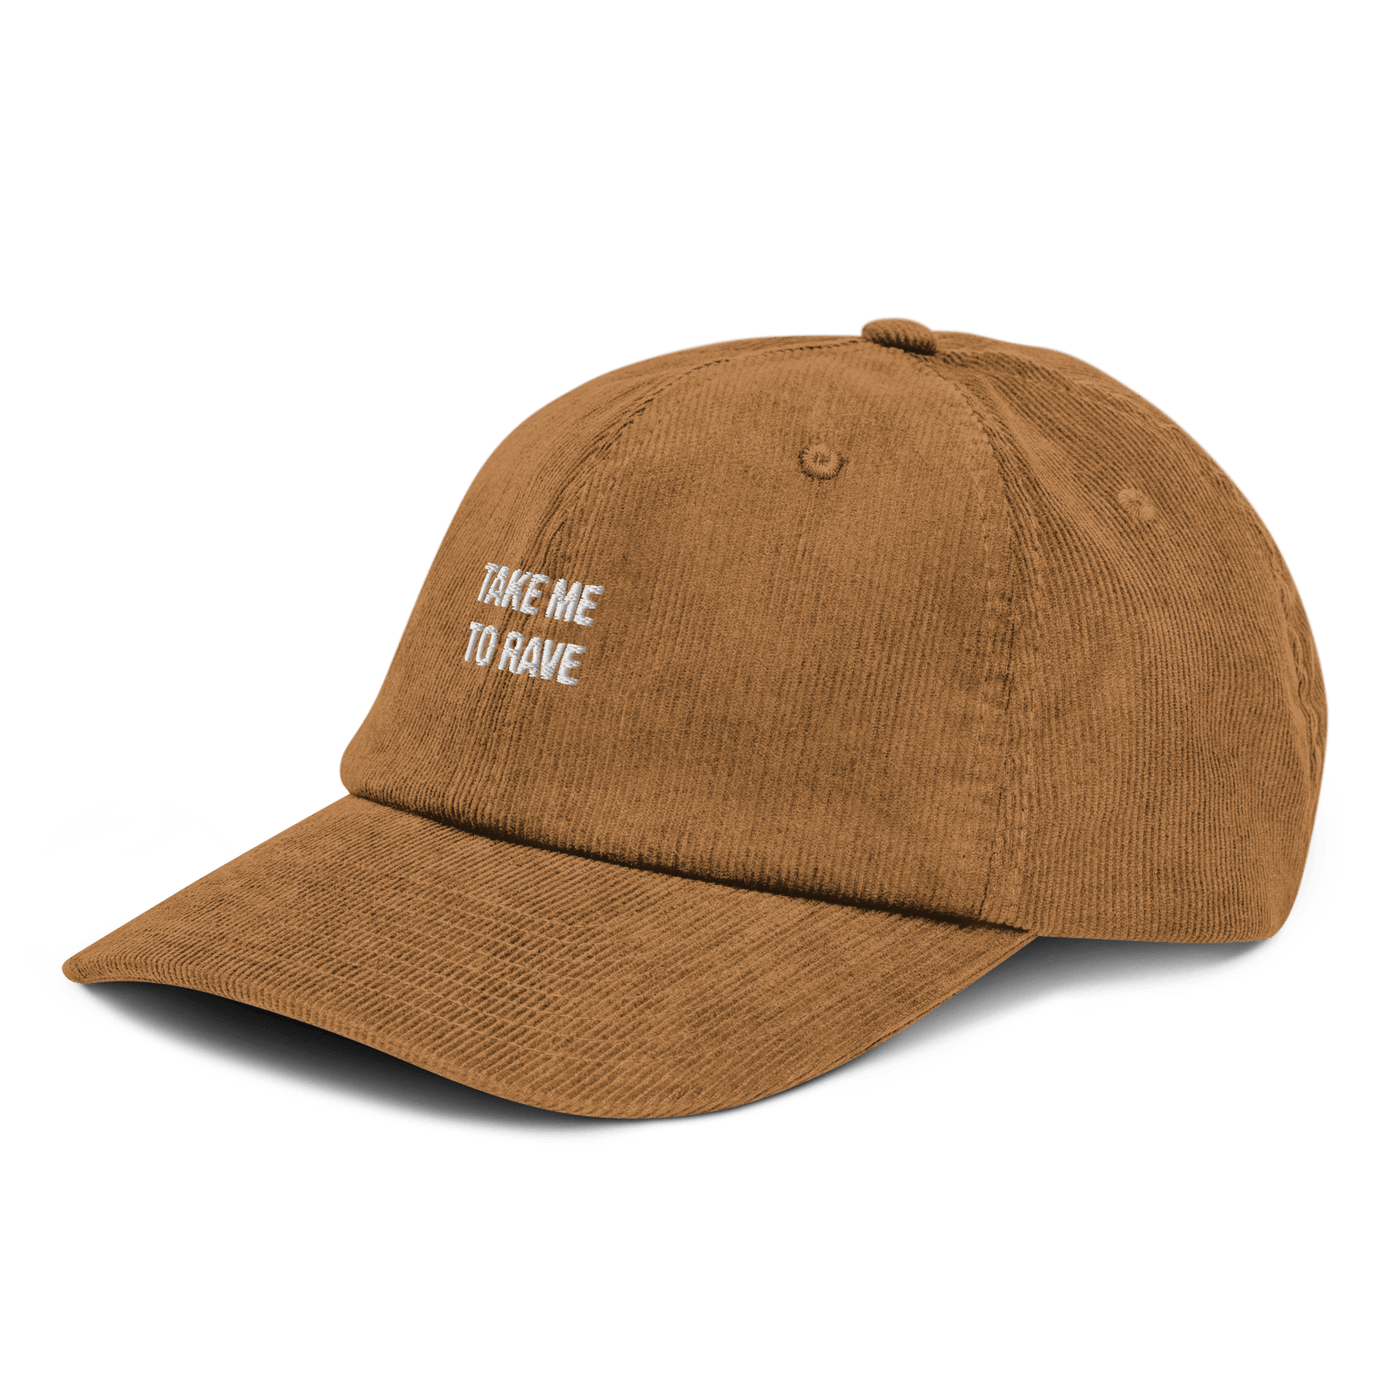 Take me to rave Corduroy hat - Camel - - Just Another Cap Store